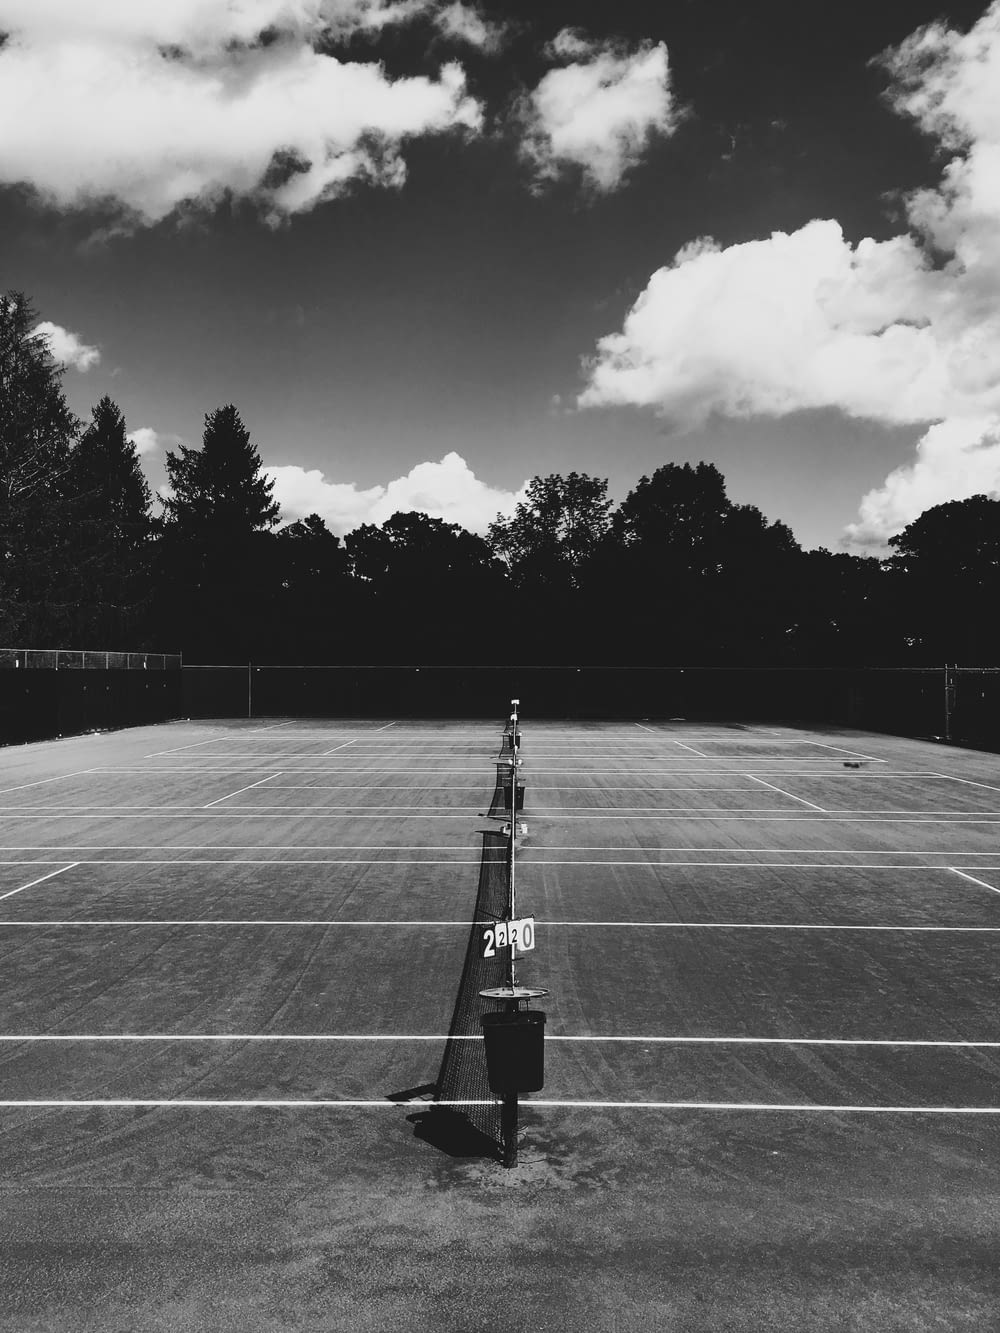 A look down the middle of a tennis net with a darkened background on a partially cloudy day.